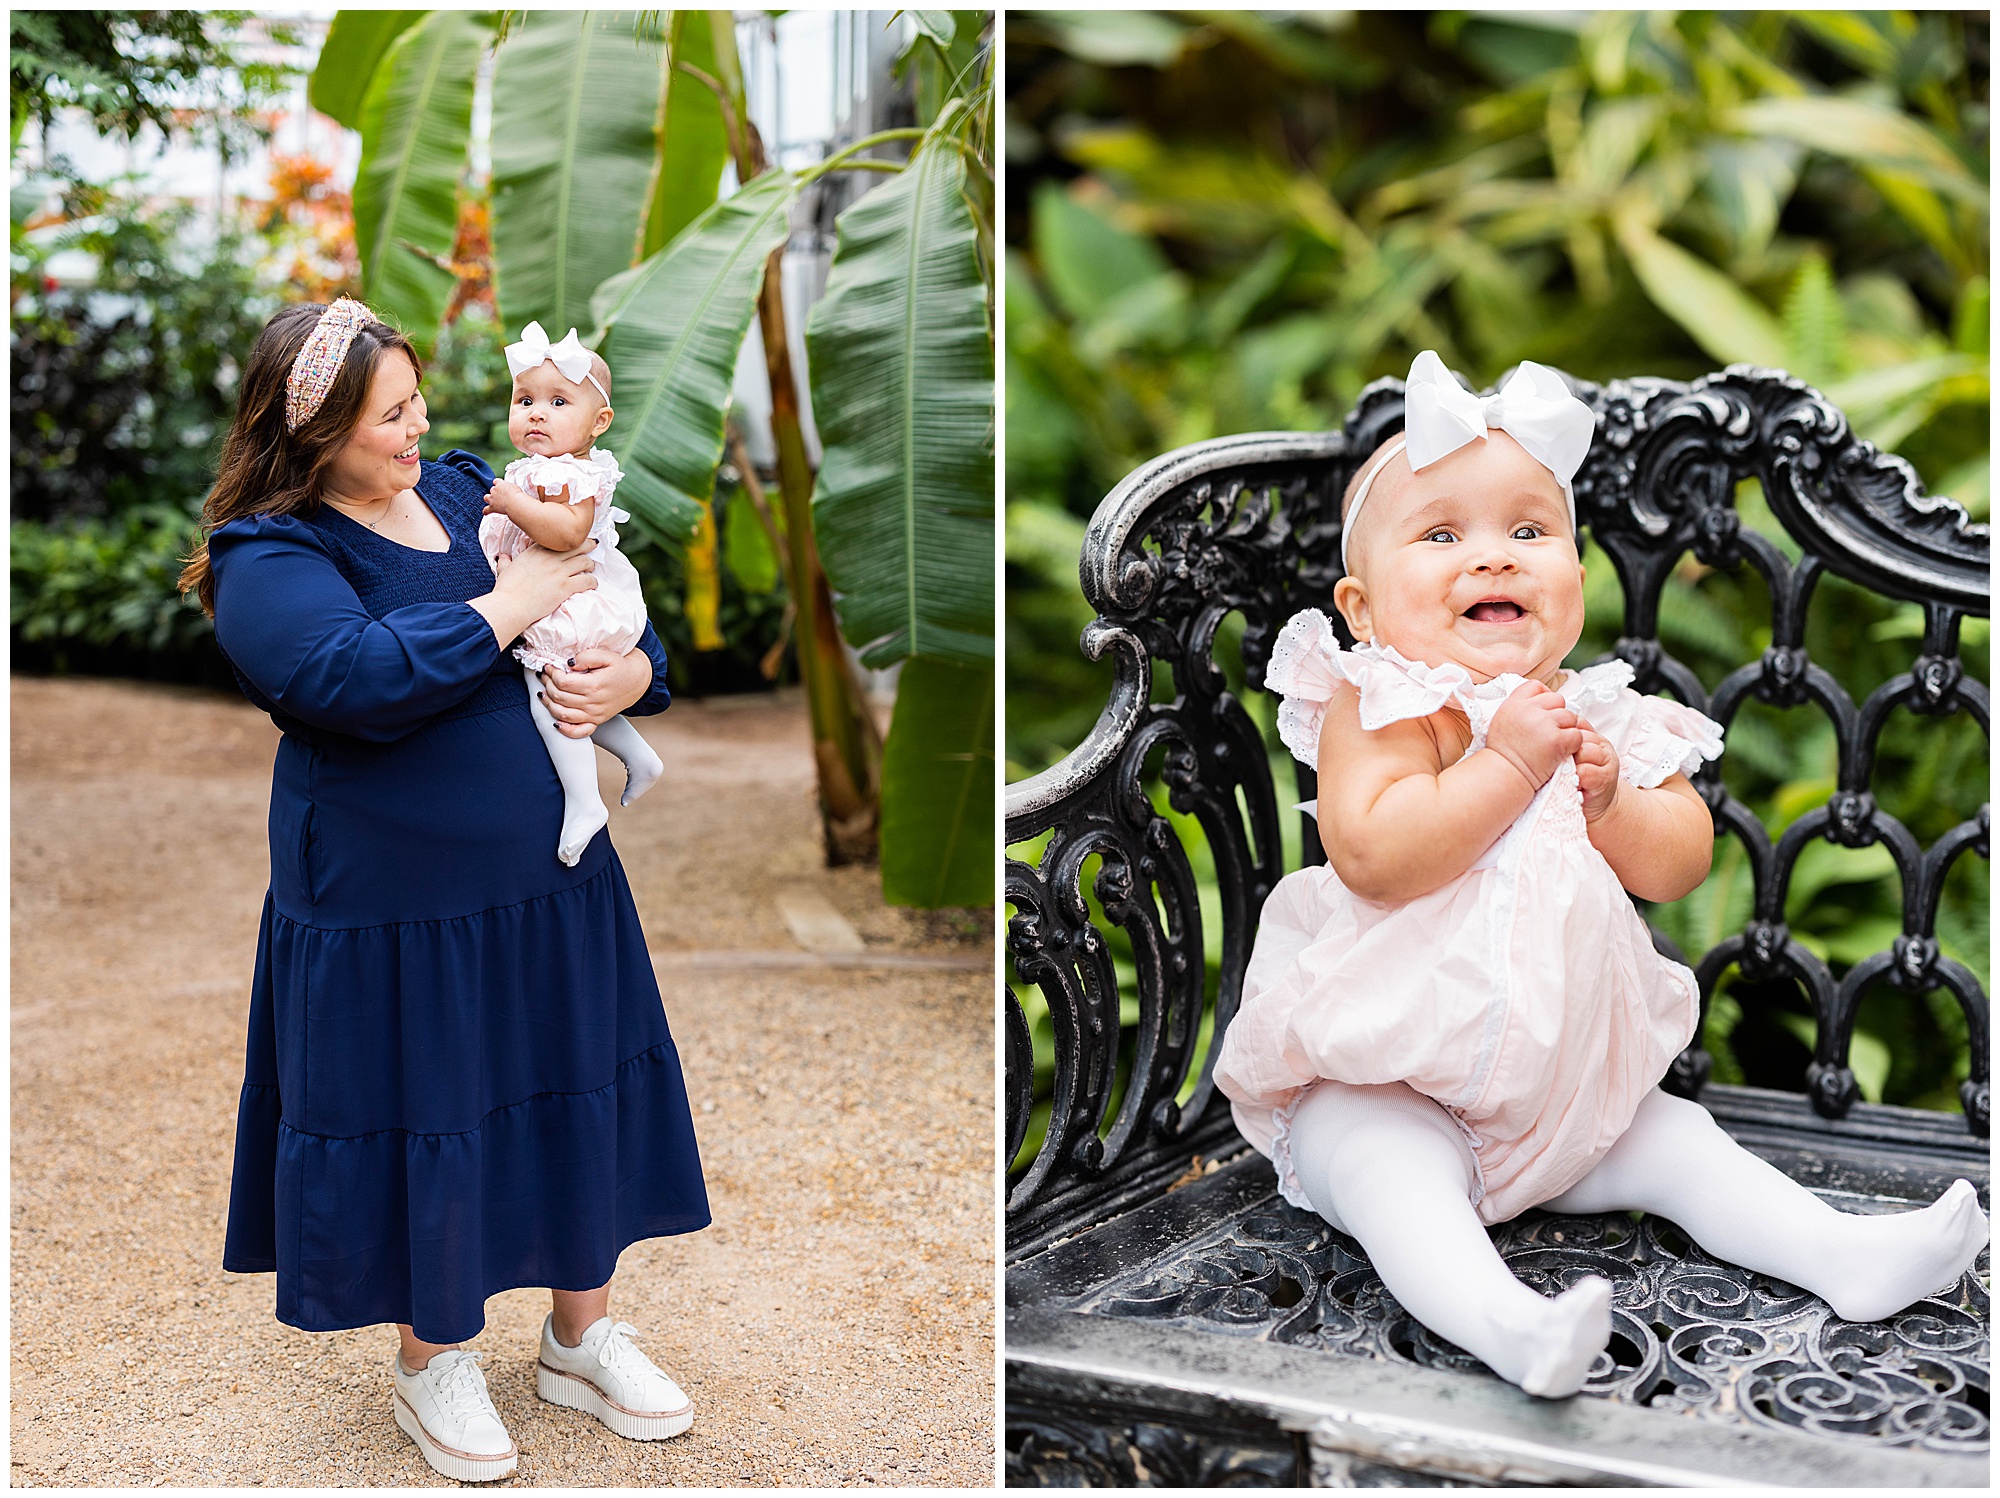 Eleanor Stenner Photography - a Birmingham, AL wedding photographer - photographs Cathryn & Quincy in her Valentine's Day Mini Sessions